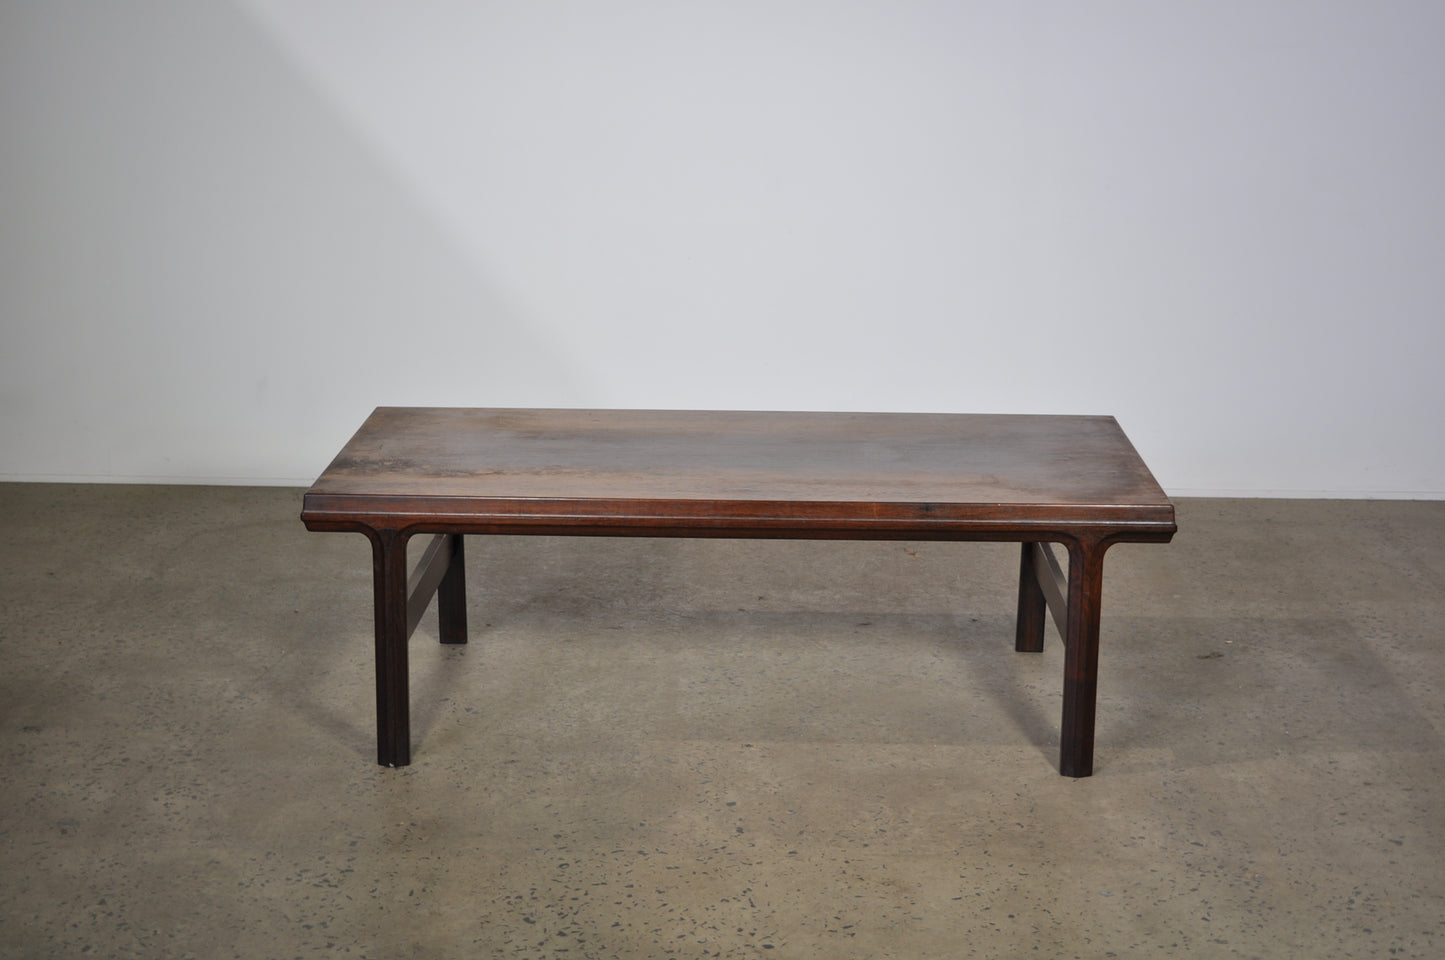 Rosewood Coffee table.